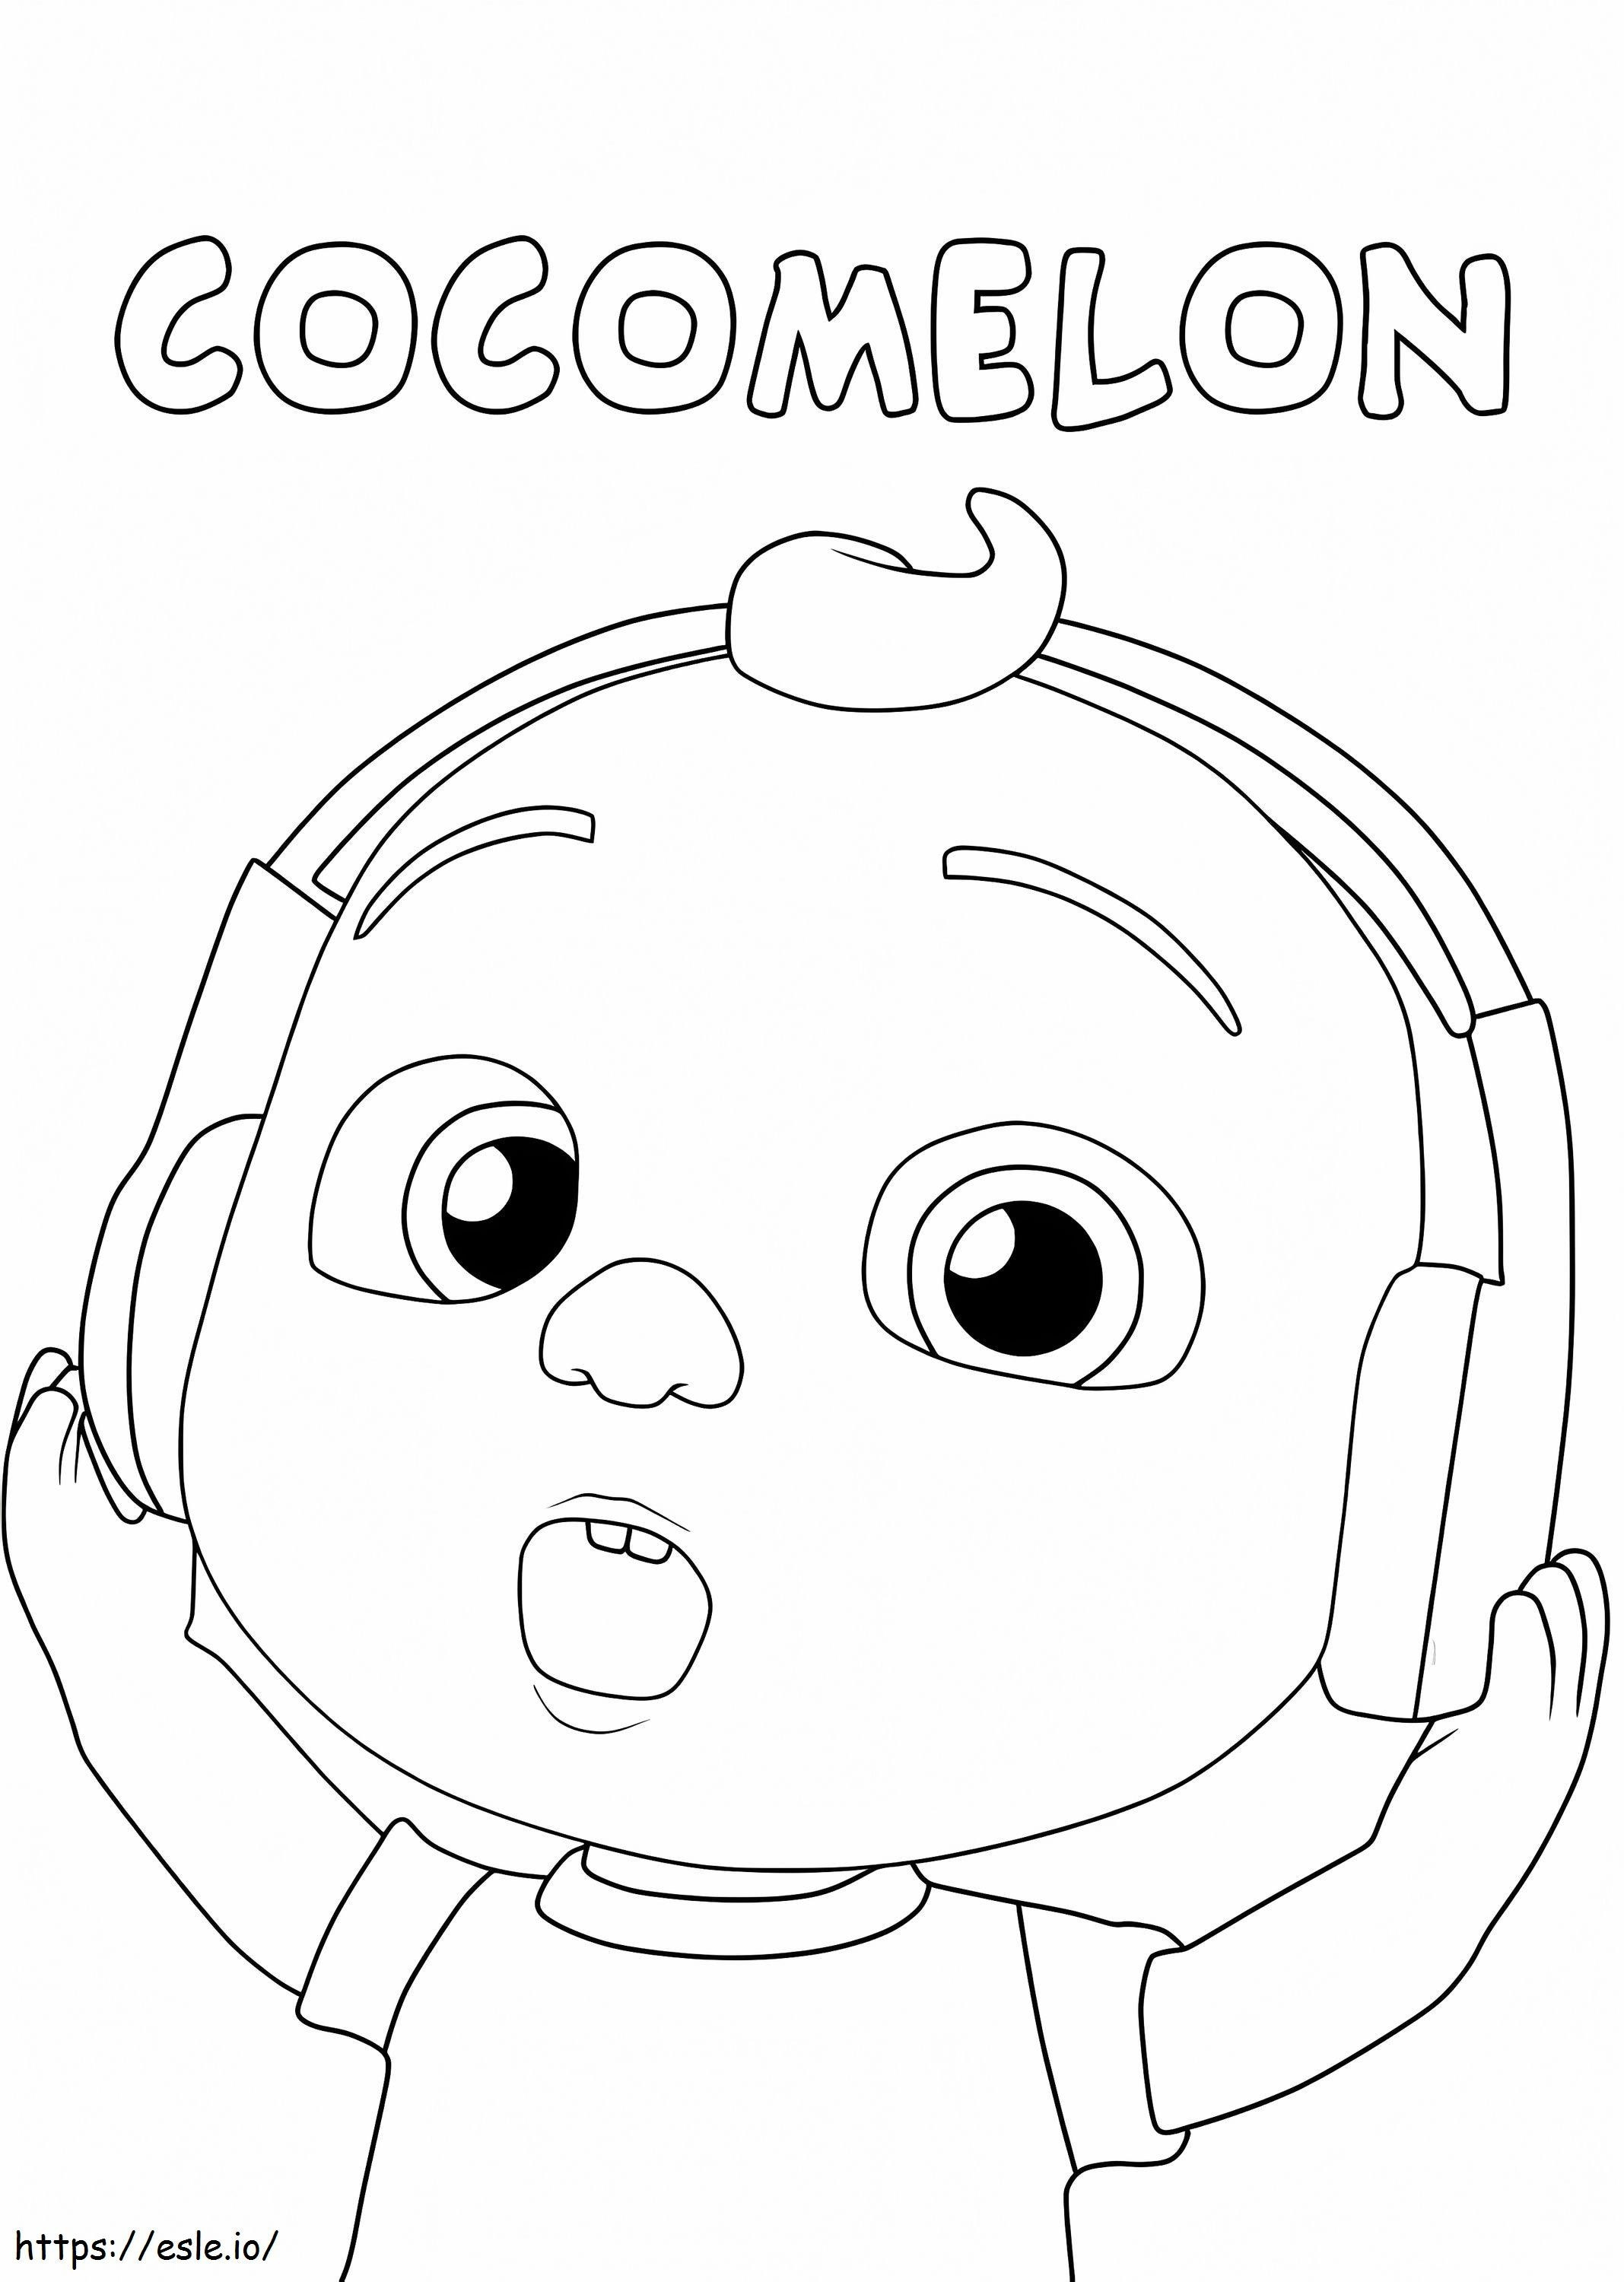 Little Johnny With Headphones coloring page